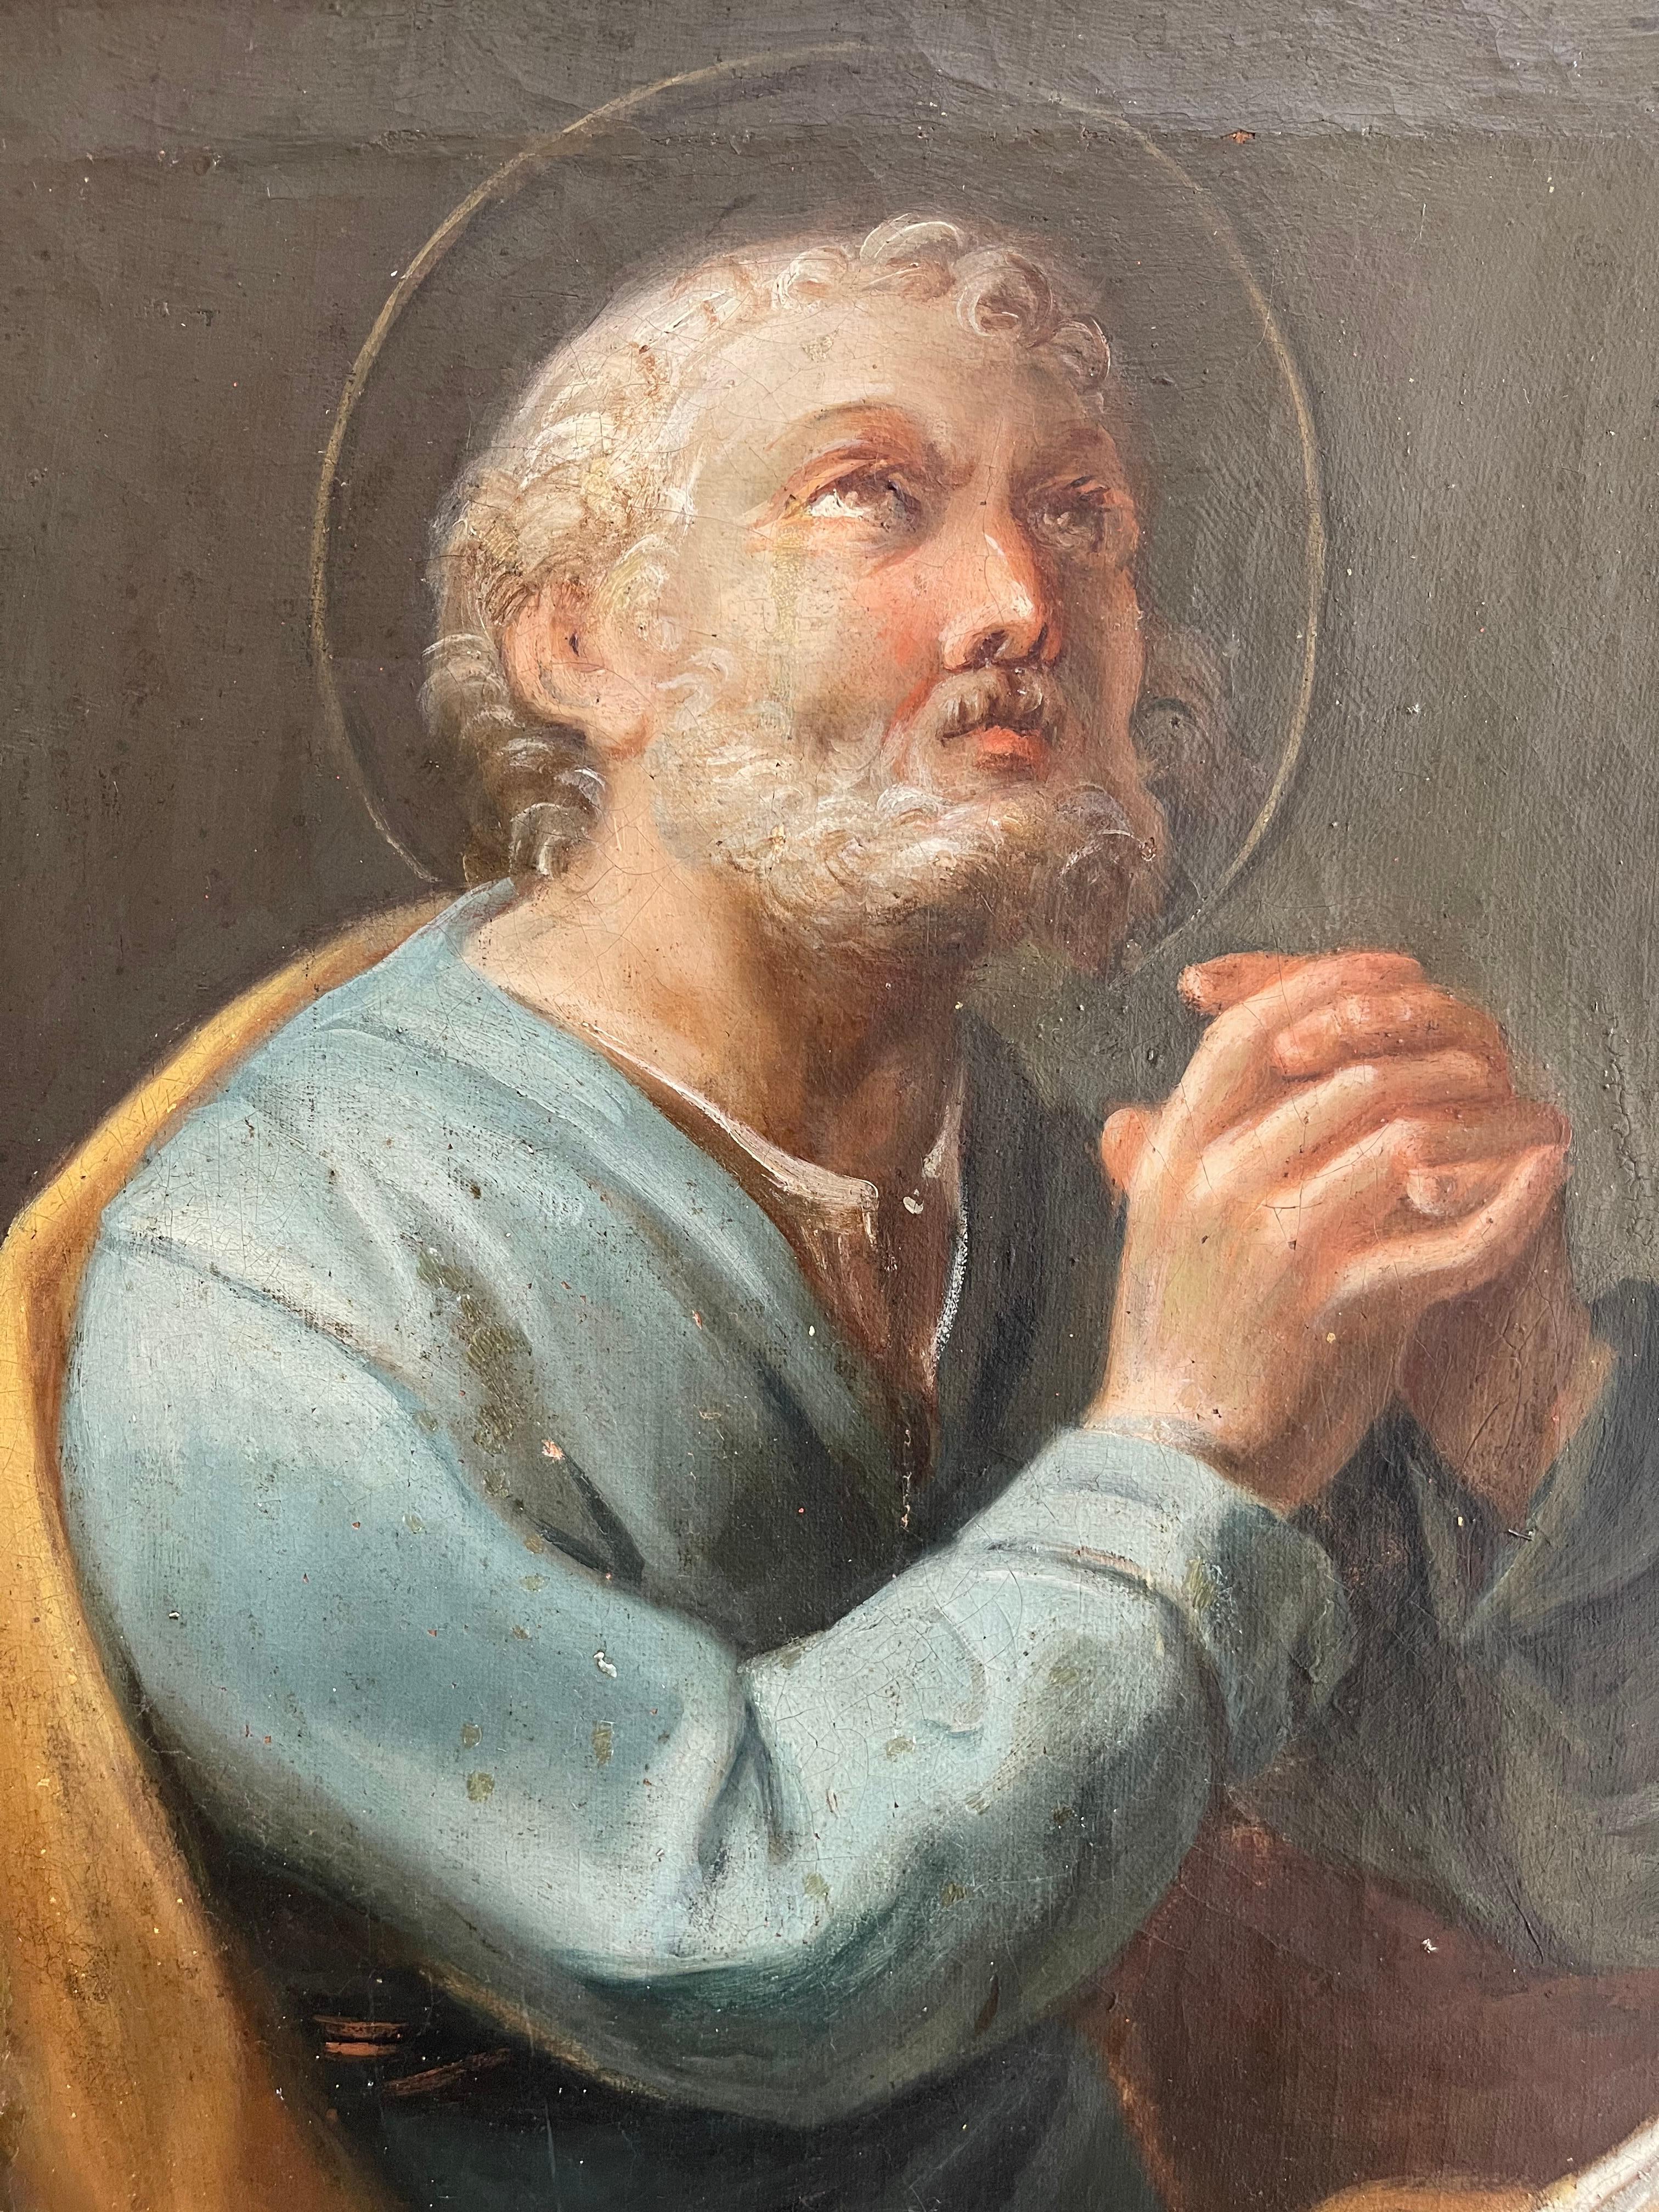 Table, oil on canvas representing Saint Peter, whose real name is Simon Bar-Jona according to the testimony of the Gospels, also called Kephas or Simon-Peter, is a Jew from Galilee or Gaulanitide known to have been one of the disciples of Jesus of